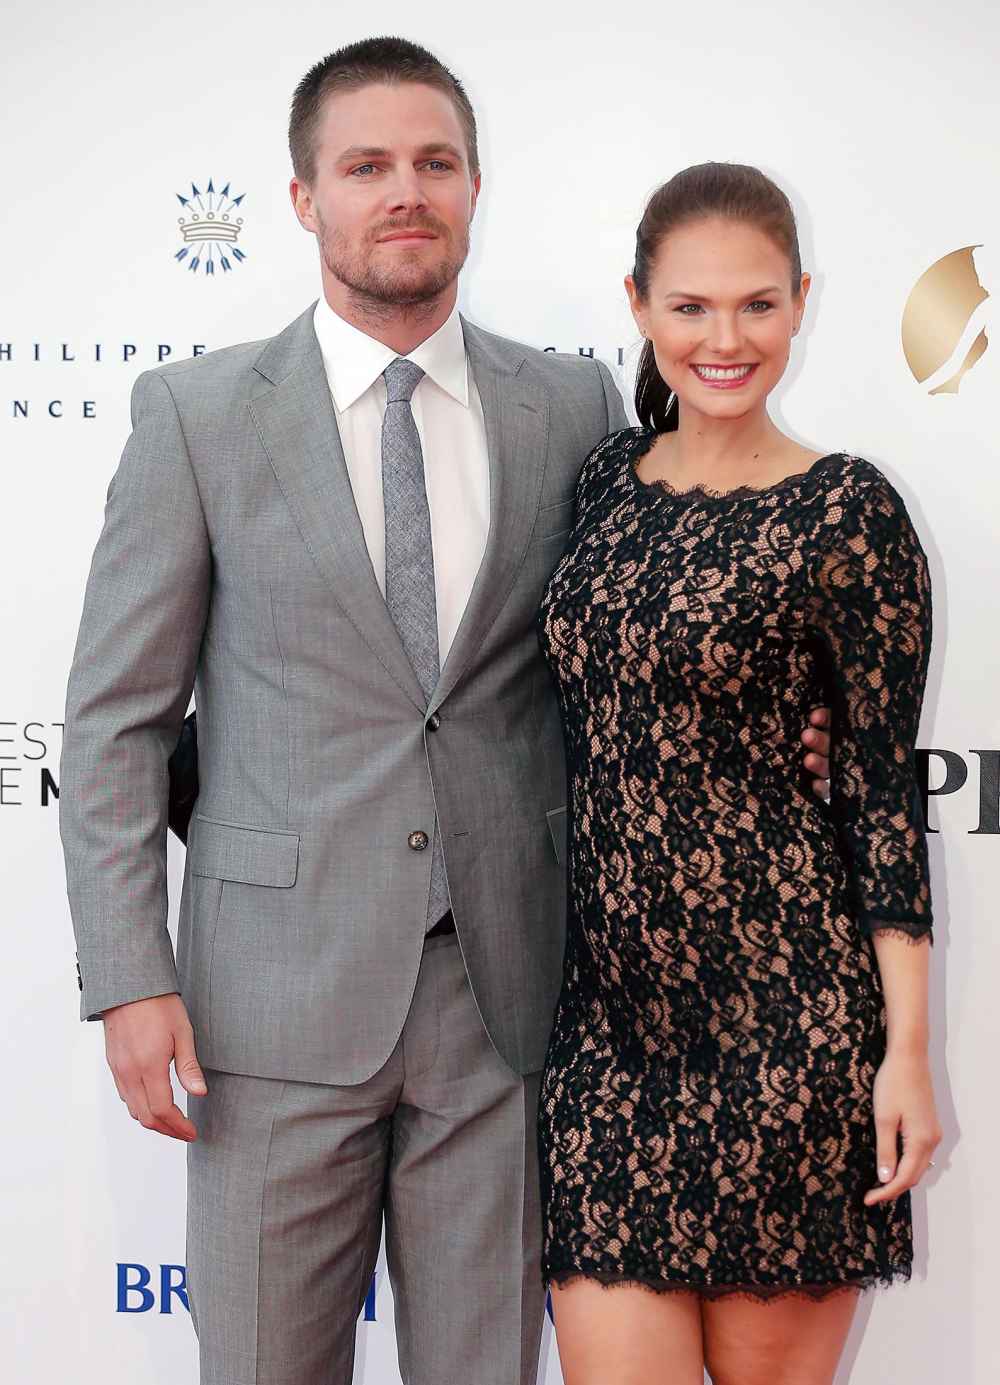 Cassandra Jean Posts About 'Self-Care' After Stephen Amell Plane Incident